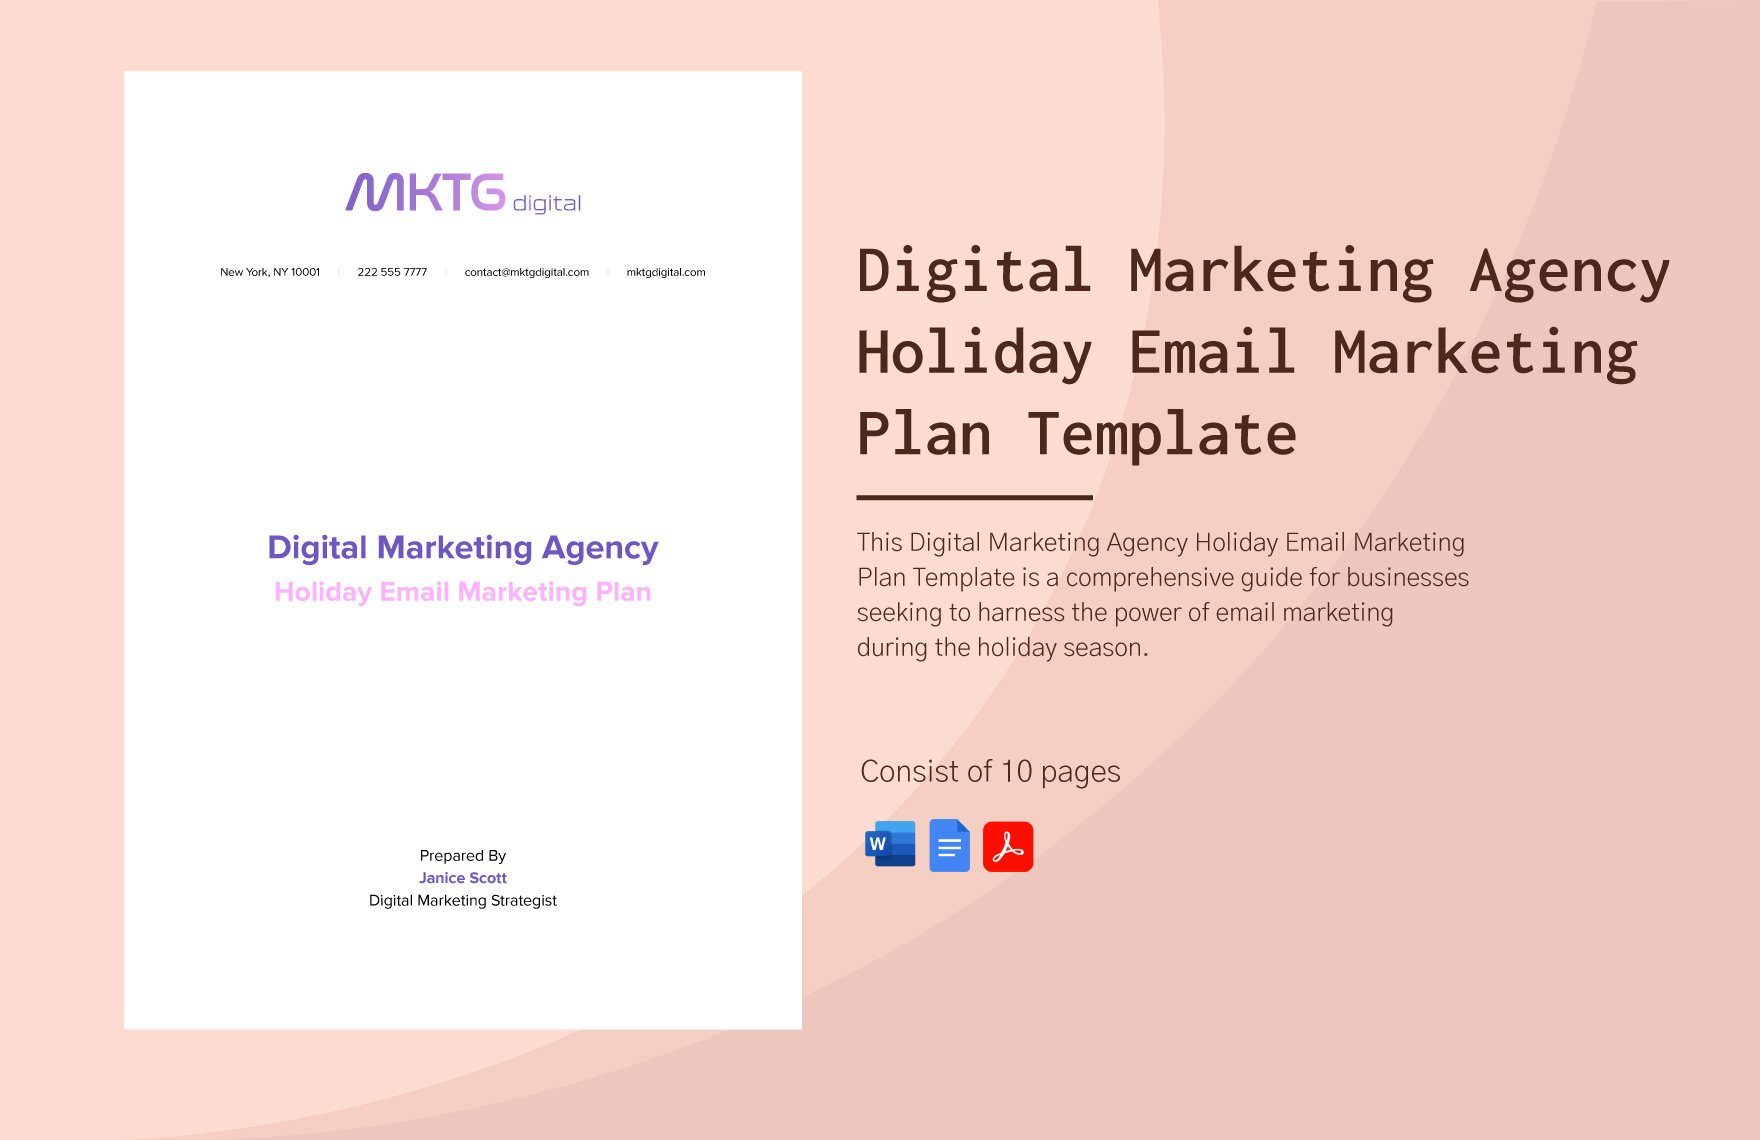 Digital Marketing Agency Holiday Email Marketing Plan Template